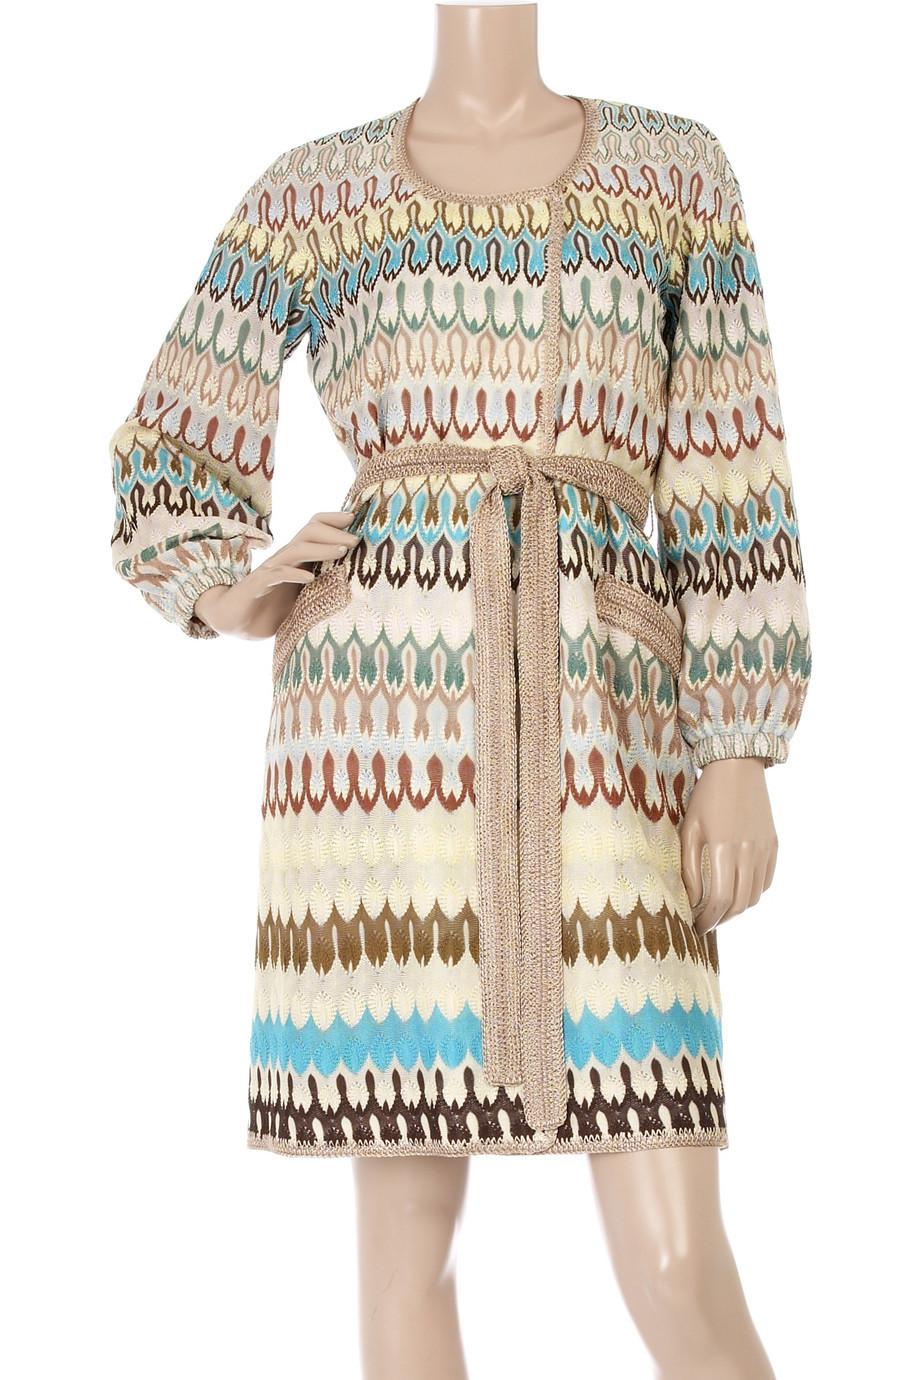 A stunning summer coat by MISSONI - impossible to find!

Multicolored silk knit coat with a double-breasted hidden press stud fastening front. 

This Missoni coat has long elasticated sleeves, a round neckline, a self-tie belt at the waist and is